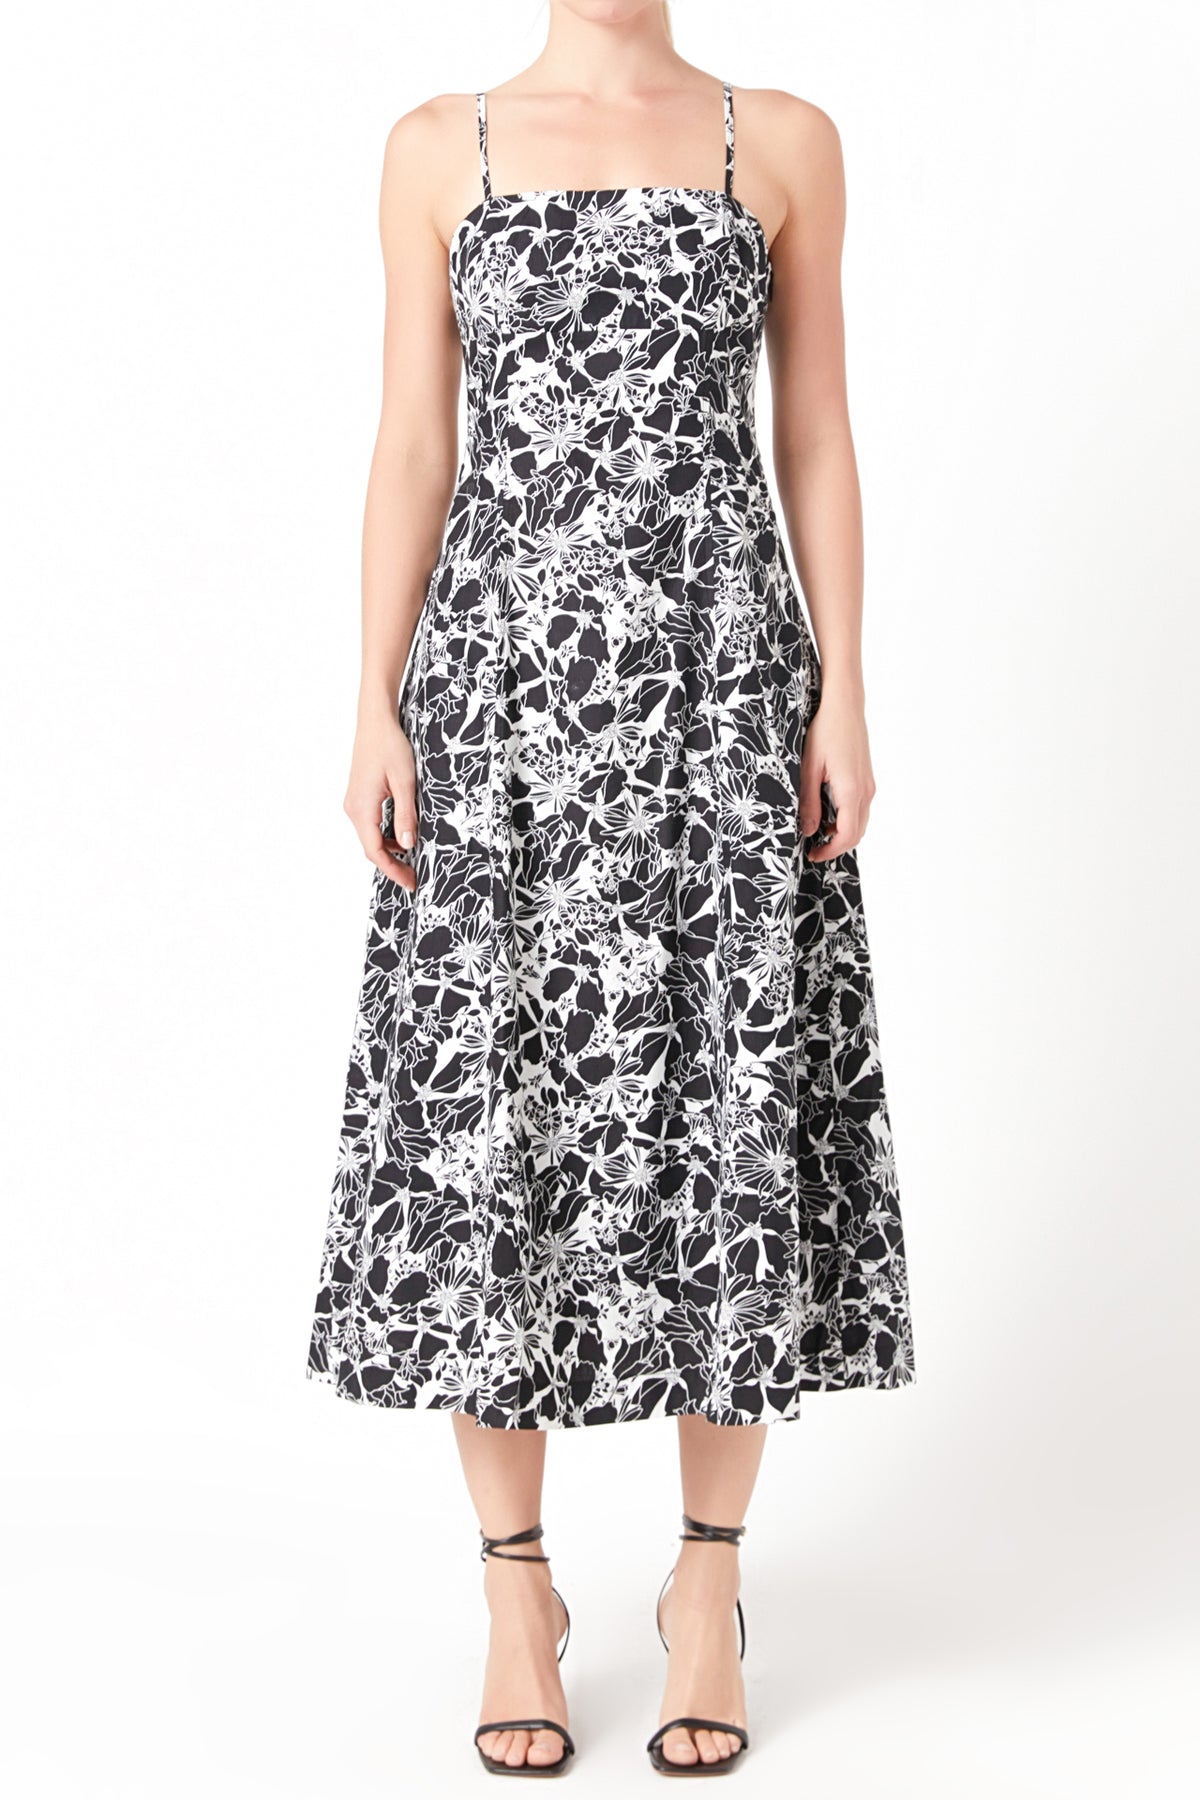 ENDLESS ROSE - Printed Cotton Maxi Dress - DRESSES available at Objectrare